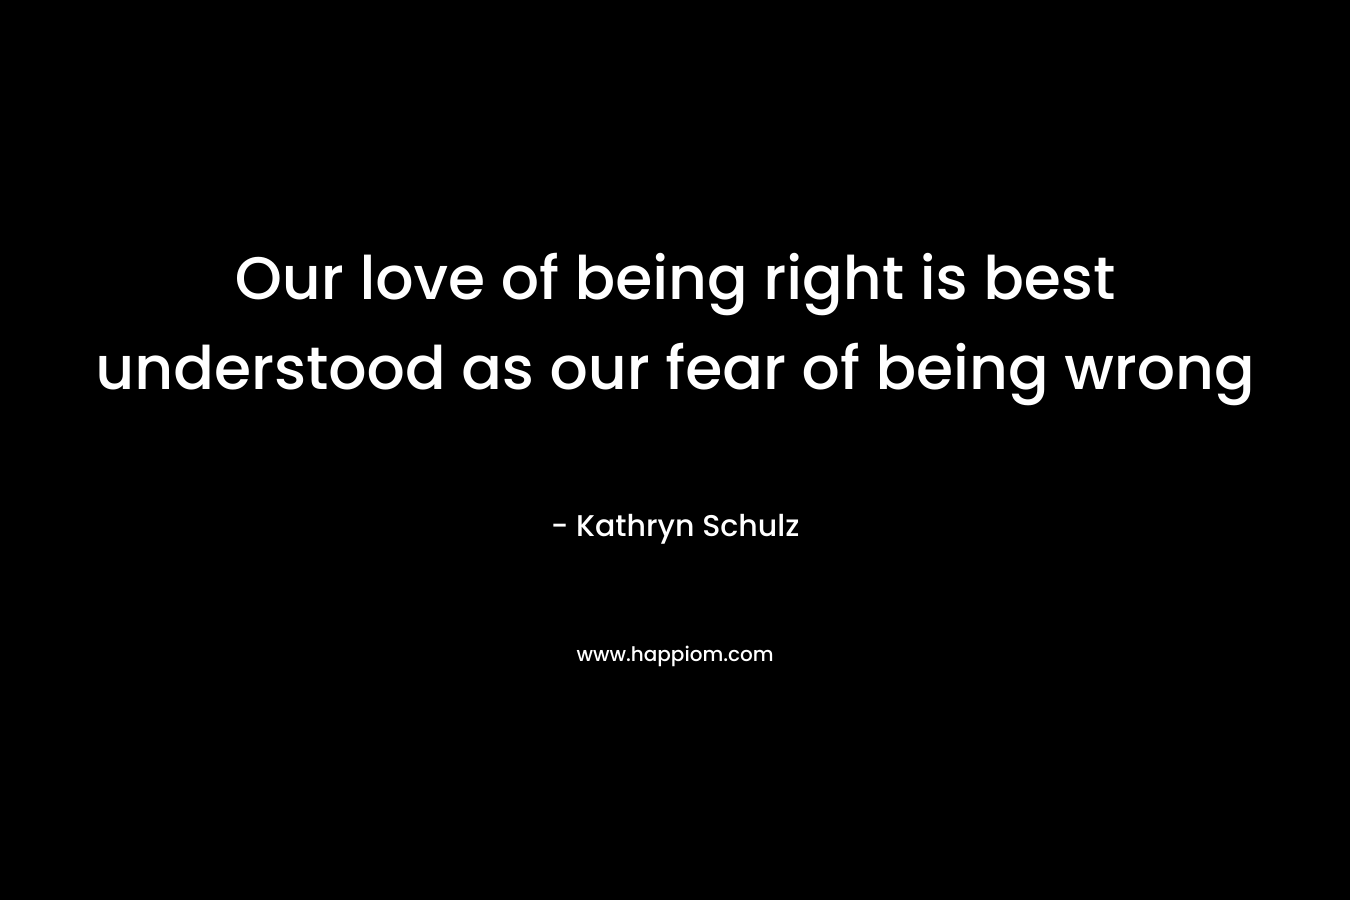 Our love of being right is best understood as our fear of being wrong – Kathryn Schulz